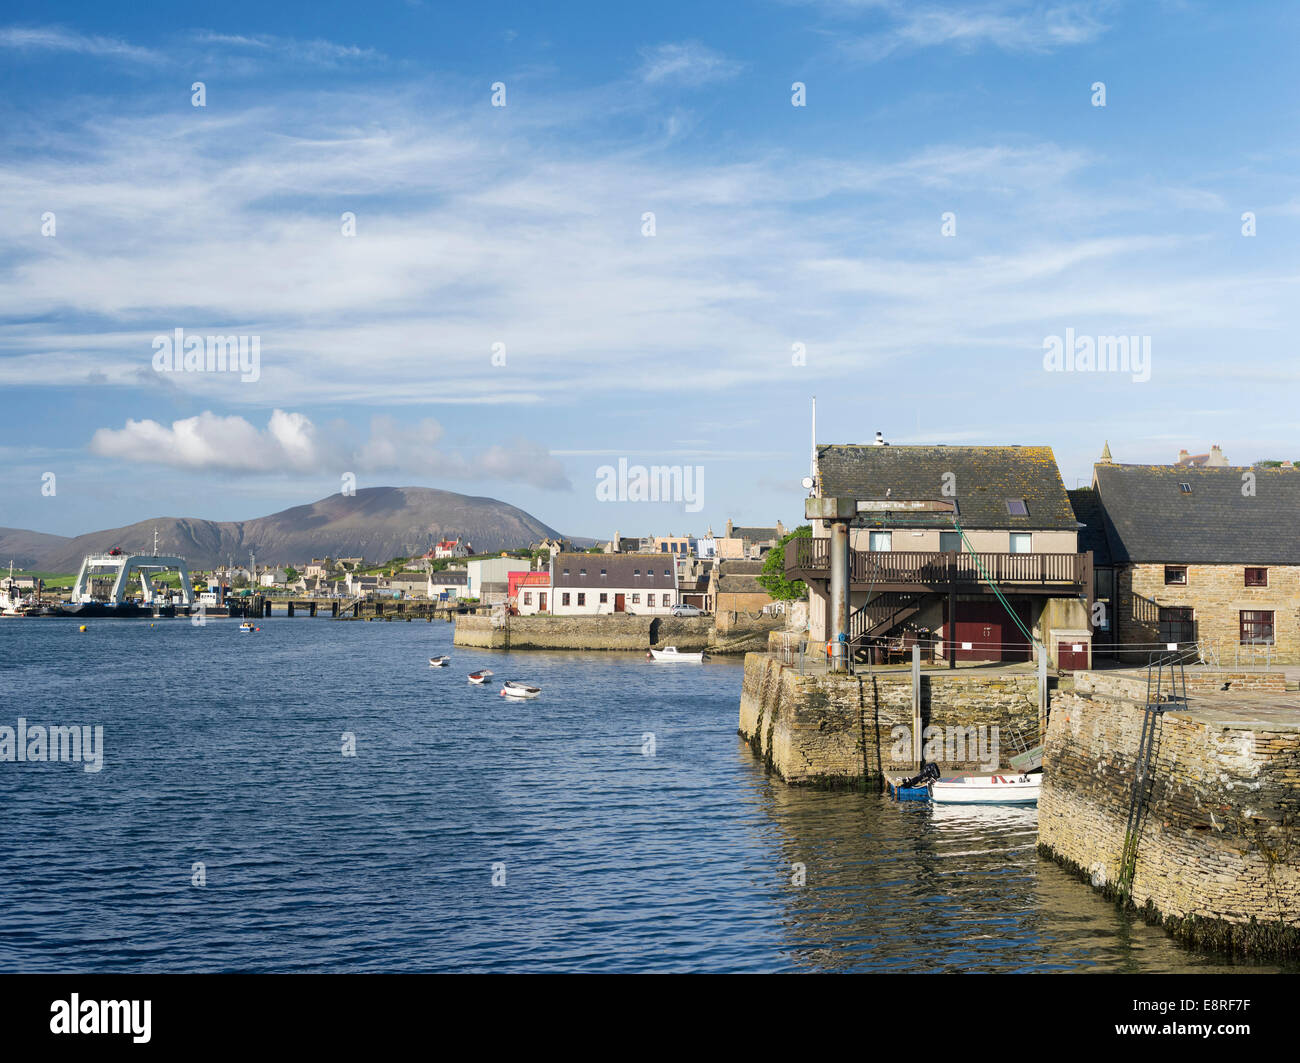 The hills of Hoy in the background, Stromness, Orkney islands, Scotland. (Large format sizes available) Stock Photo